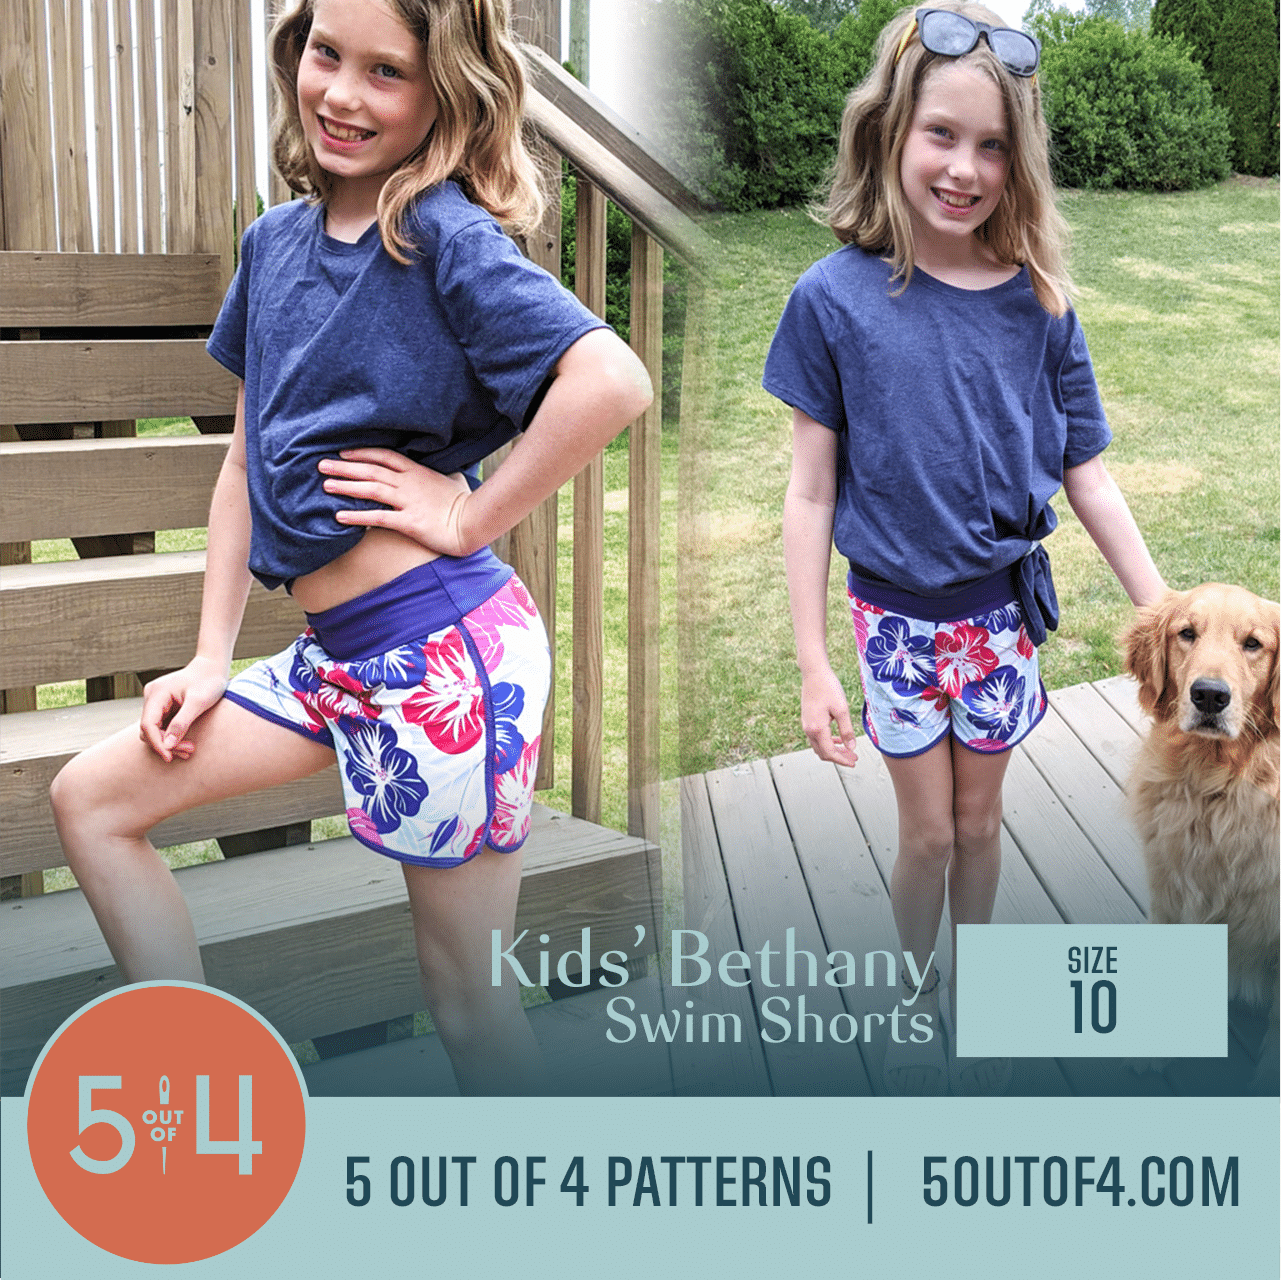 Kids' Bethany Swim Shorts - 5 out of 4 Patterns